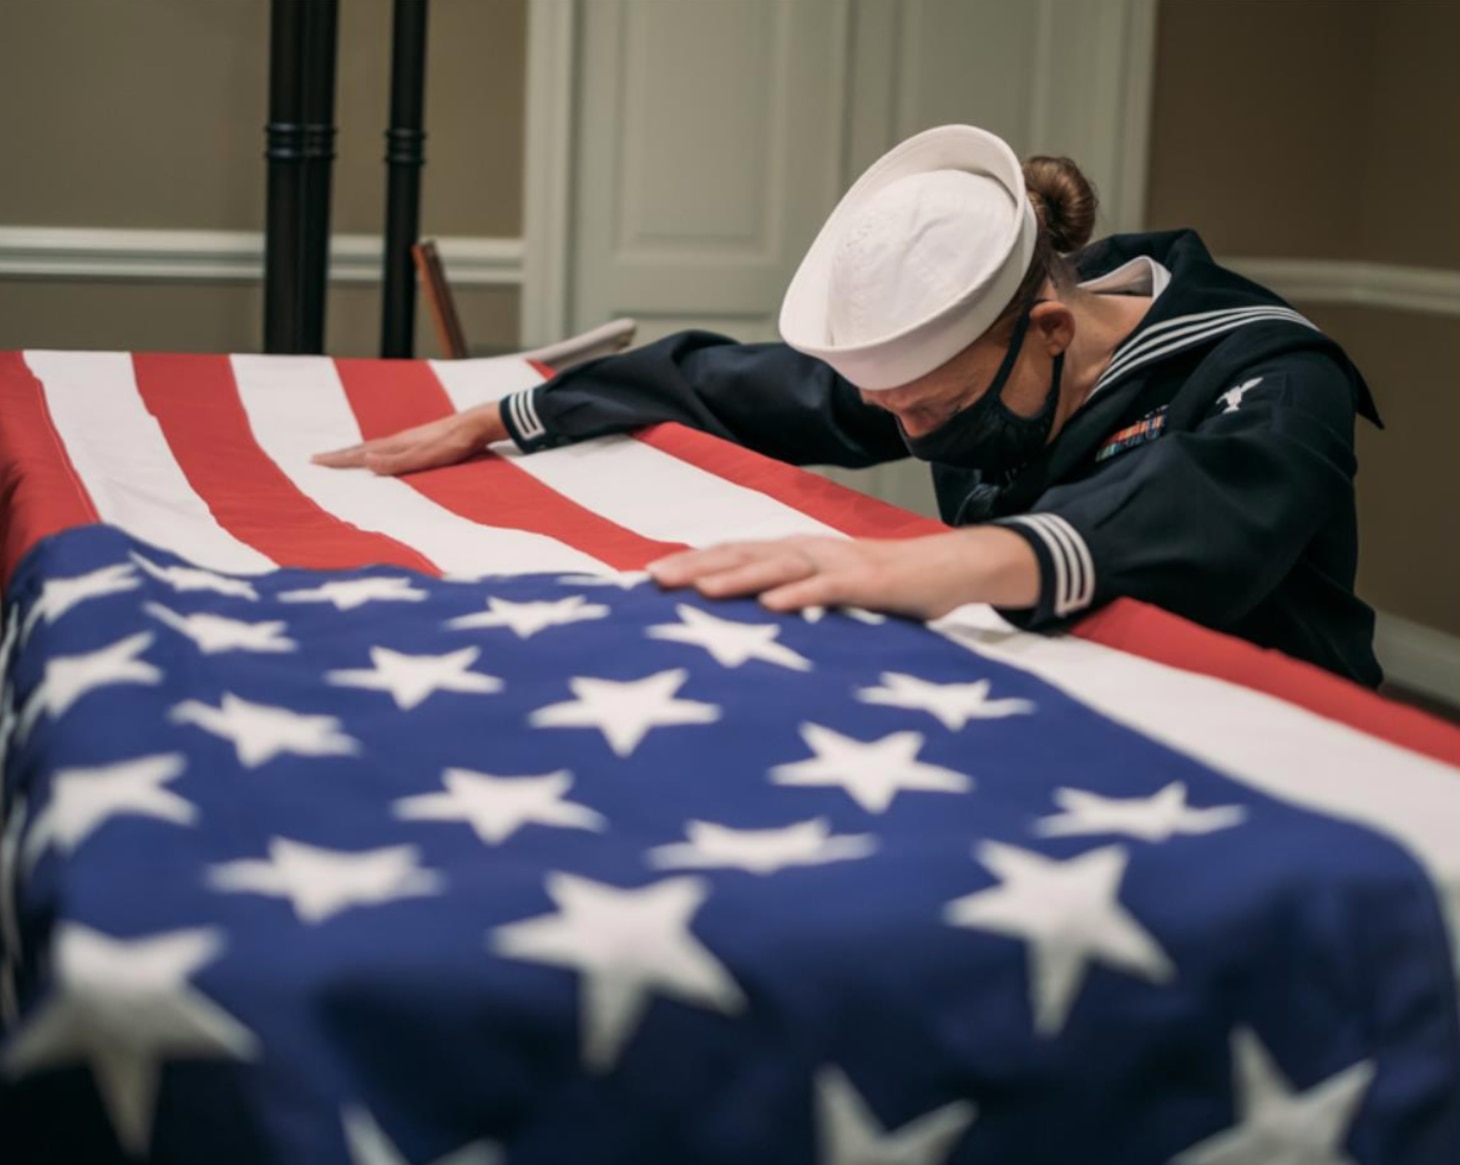 Personnel Specialist 1st Class Kitara Byerly attends her husband's funeral in Georgetown, Texas, 22 Nov., 2020.